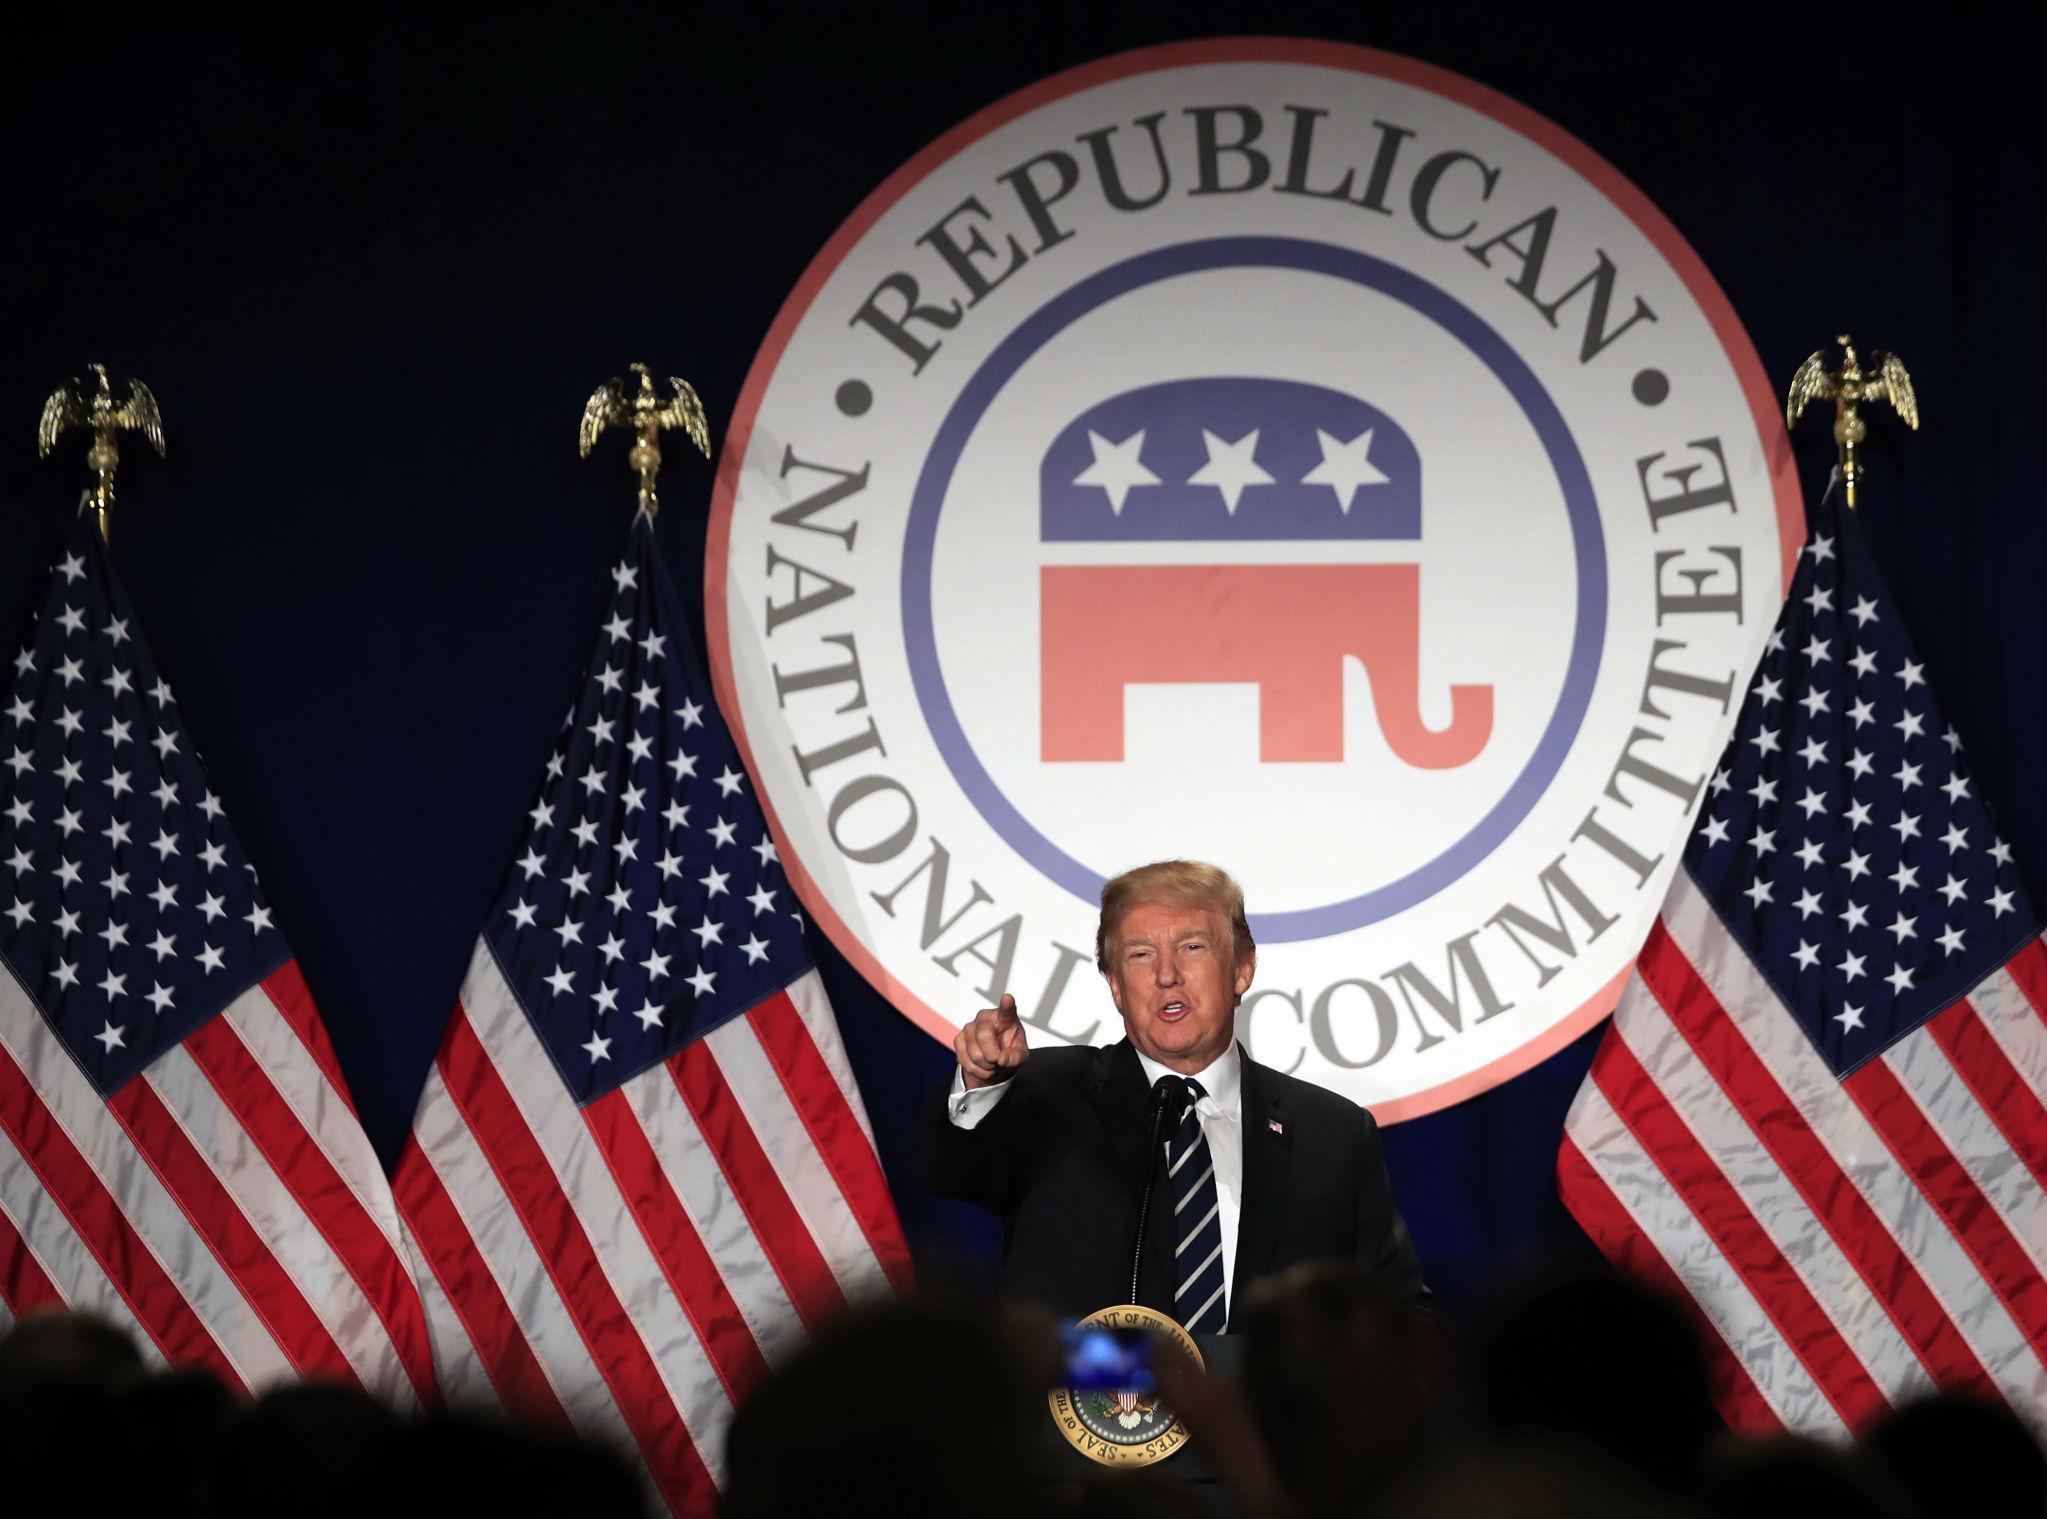 Donald Trump spoke at the Republican National Committee's winter meeting at the Trump International Hotel in Washington, DC.